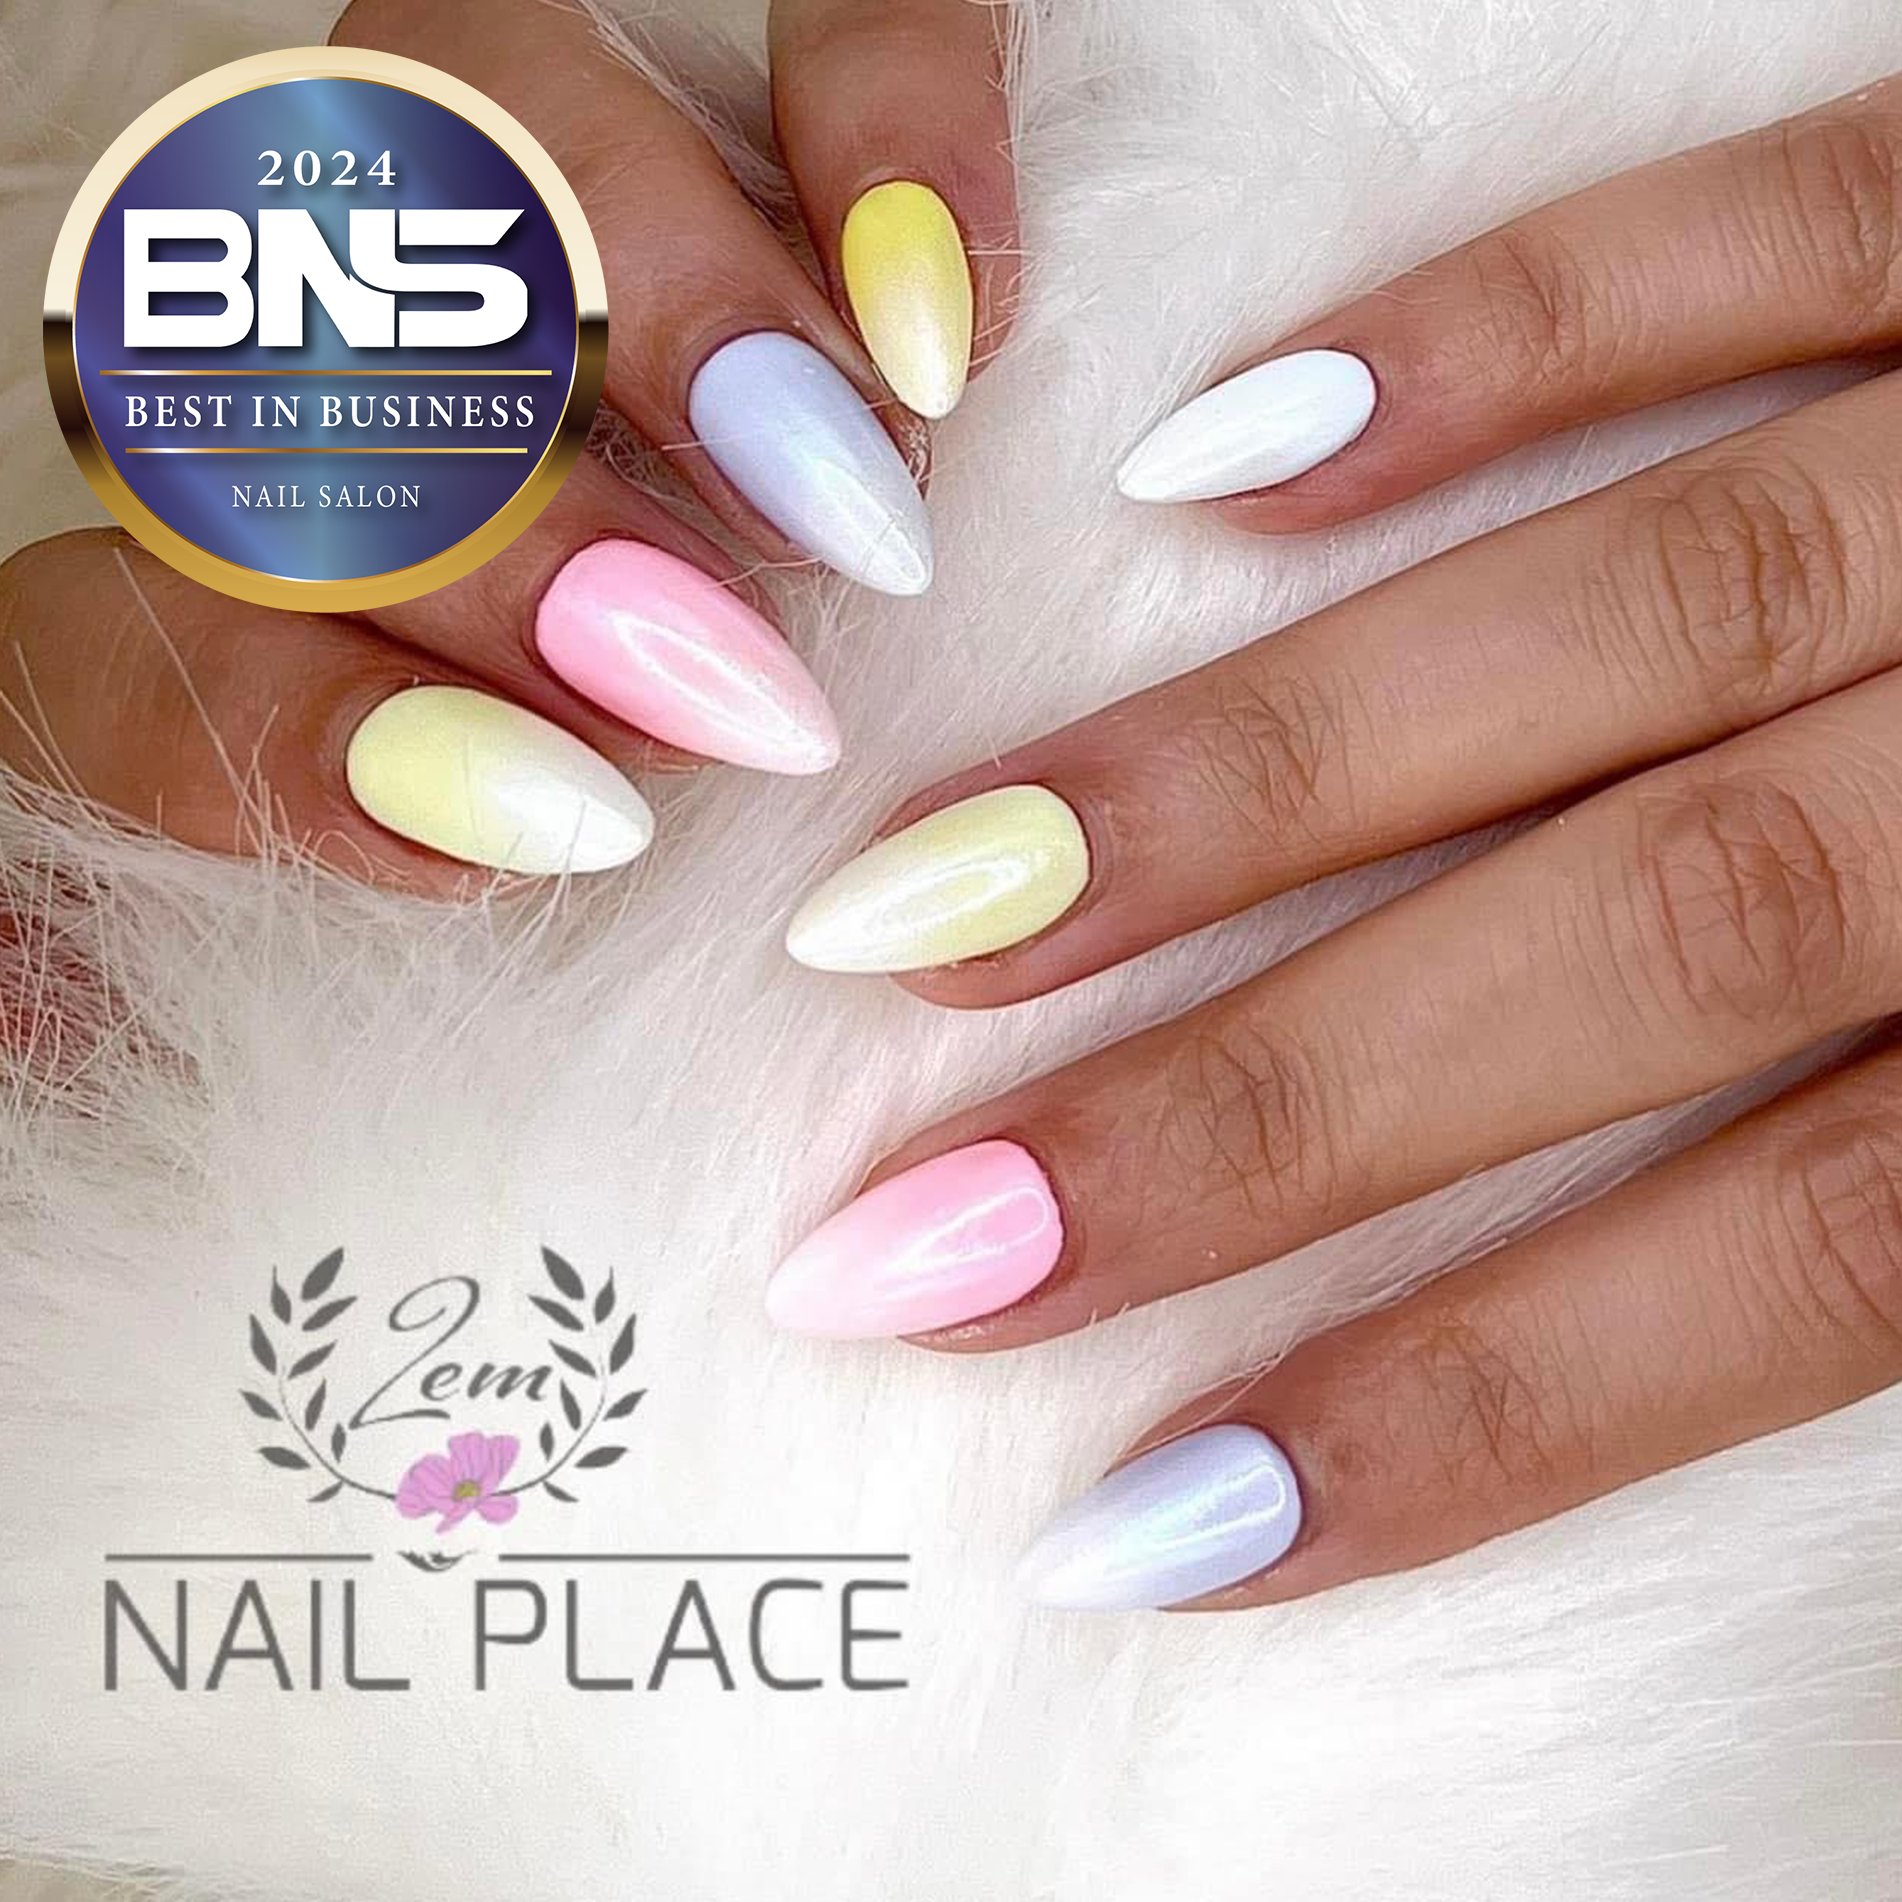 What are the reviews of the customers after using nail services at OMG Nails  | Nail salon 29072